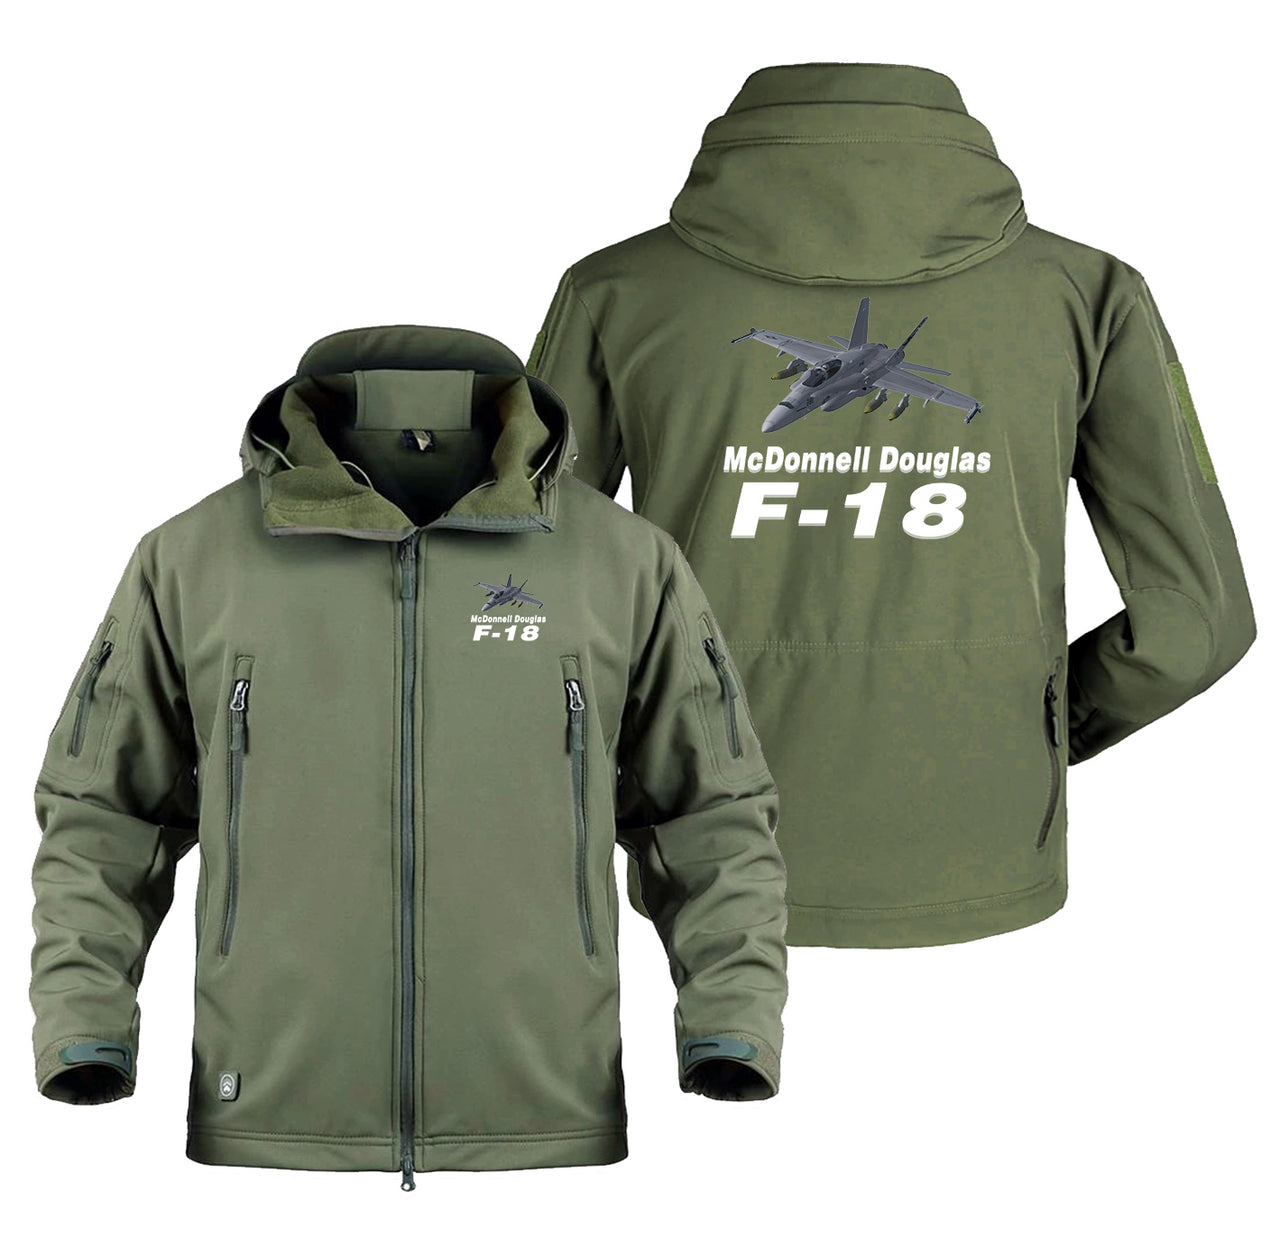 The McDonnell Douglas F18 Designed Military Jackets (Customizable)